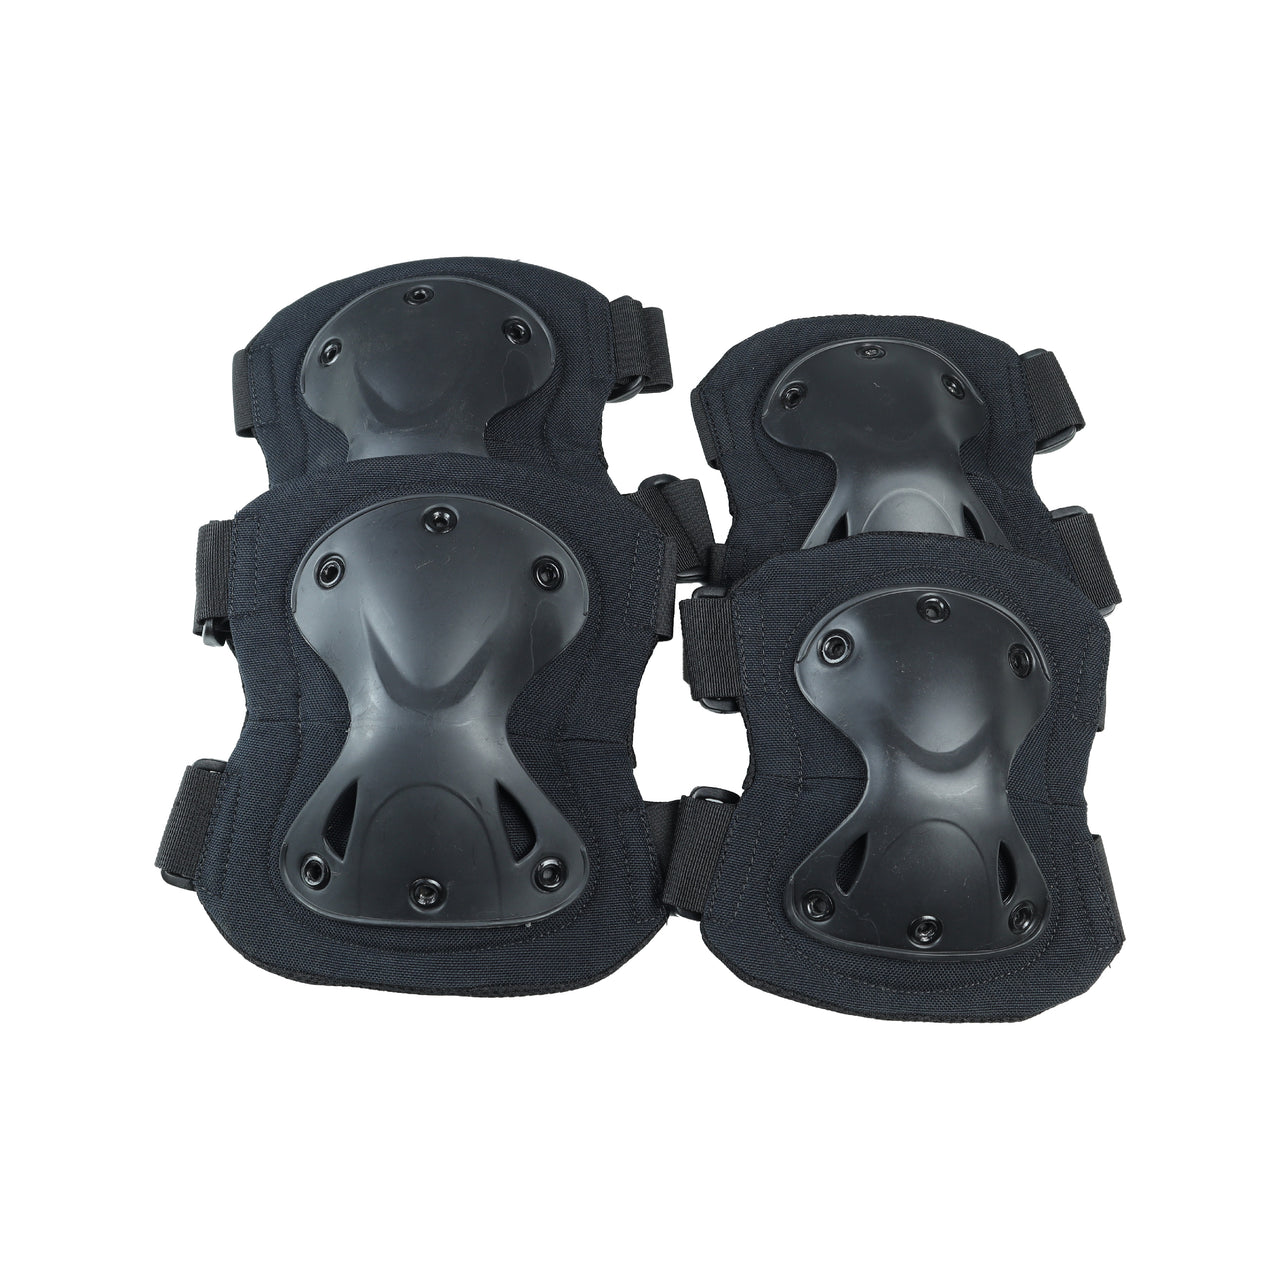 Set of 4 Tactical Knee and Elbow Pads - Black